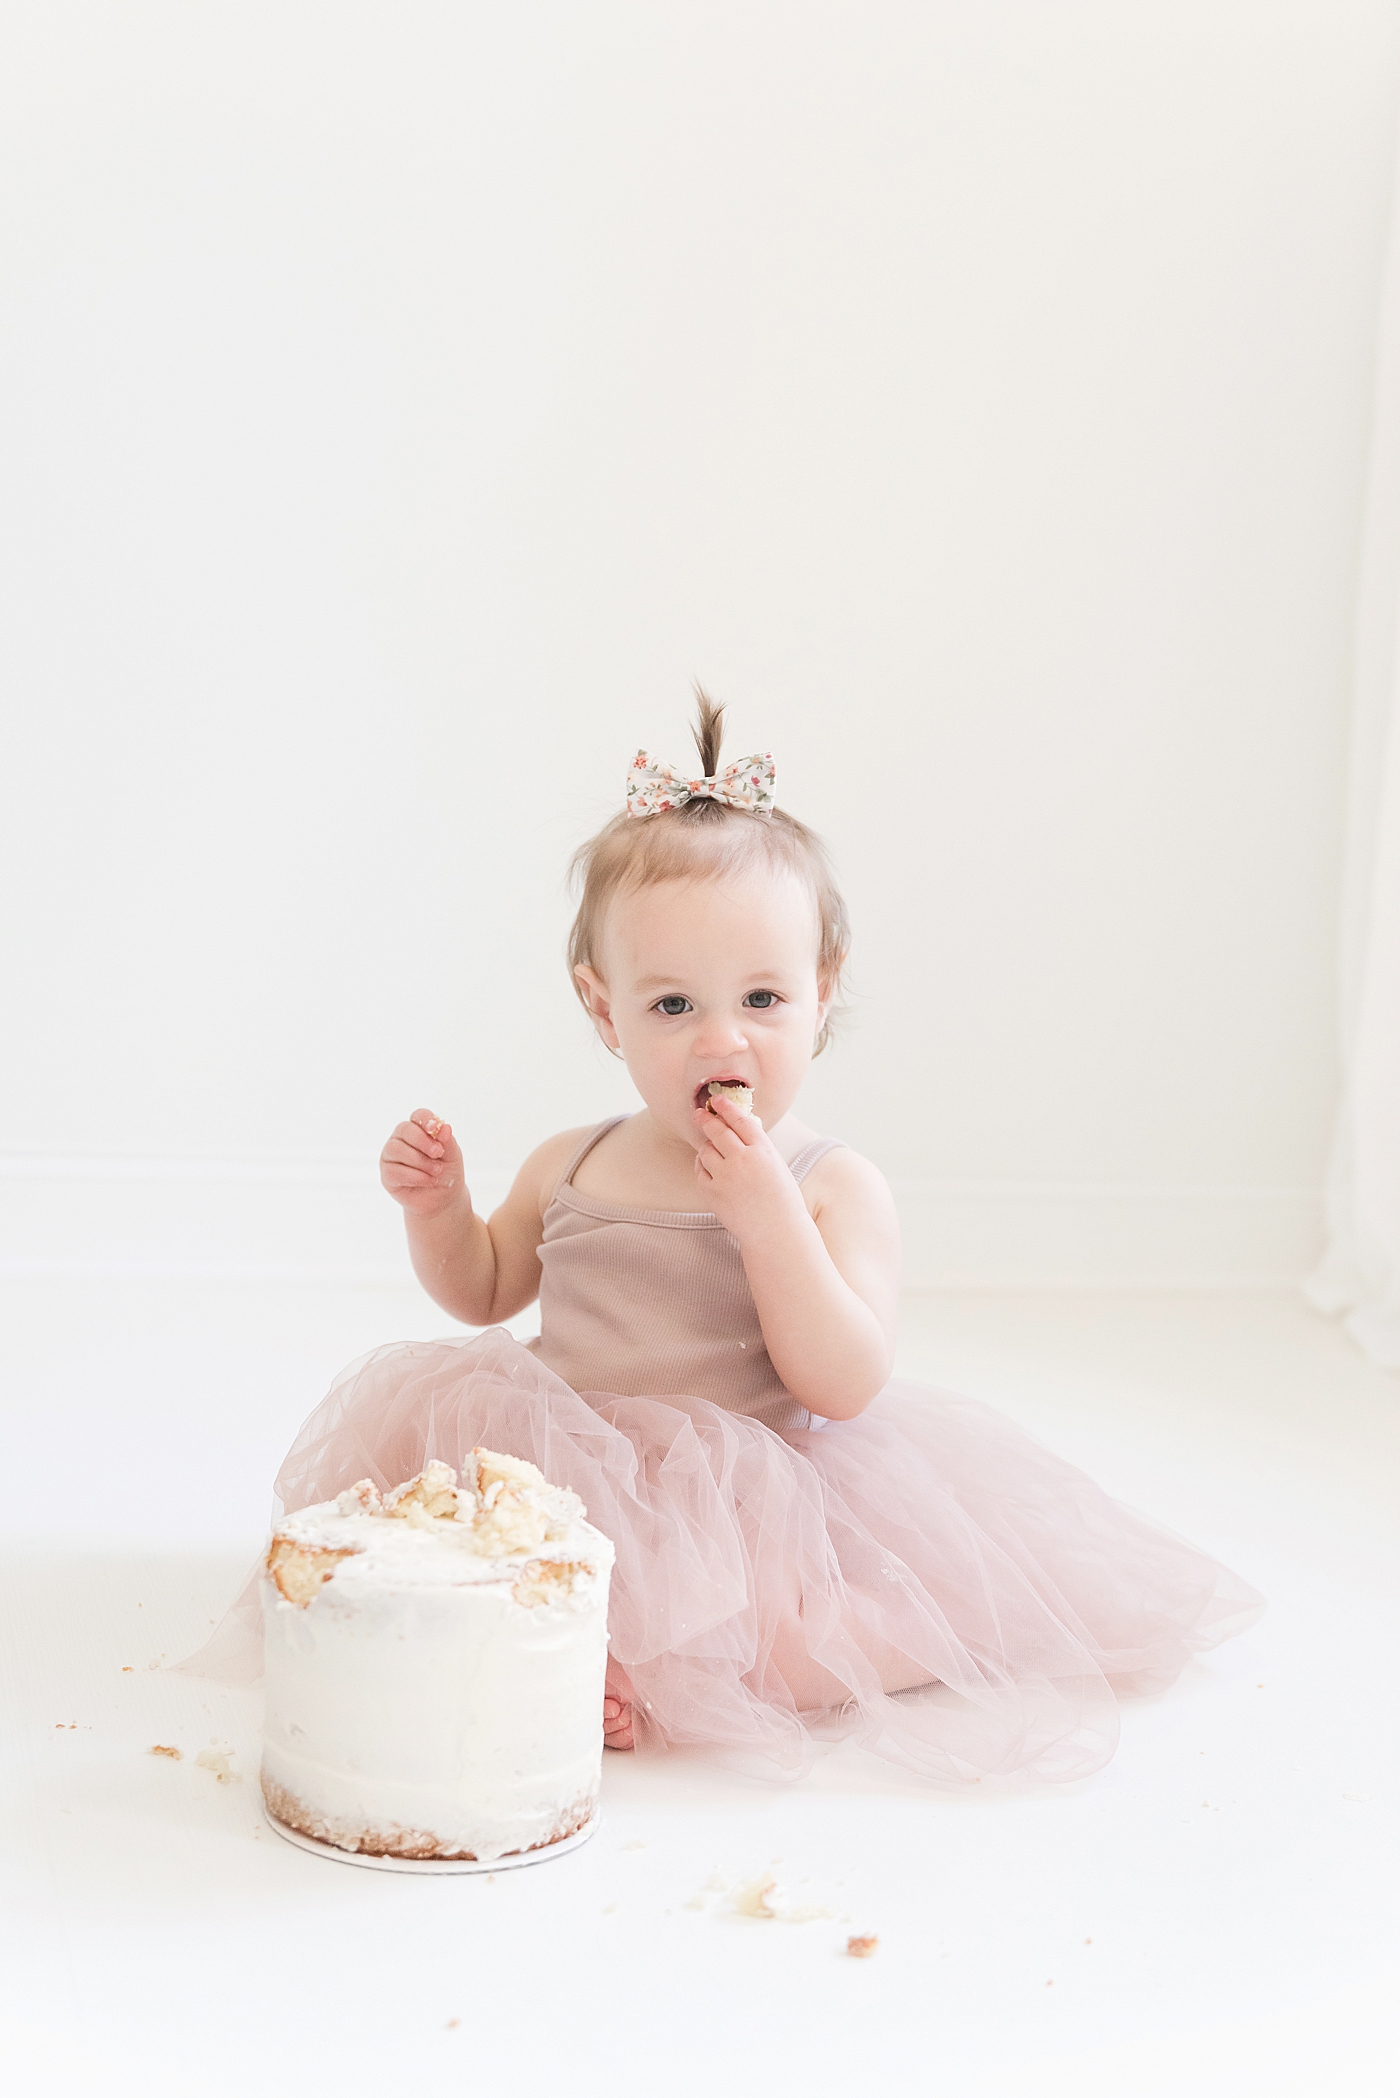 Baby girl in pink tutu with floral bow eating cake | Photo by Huntersville Baby Photographer Anna Wisjo 